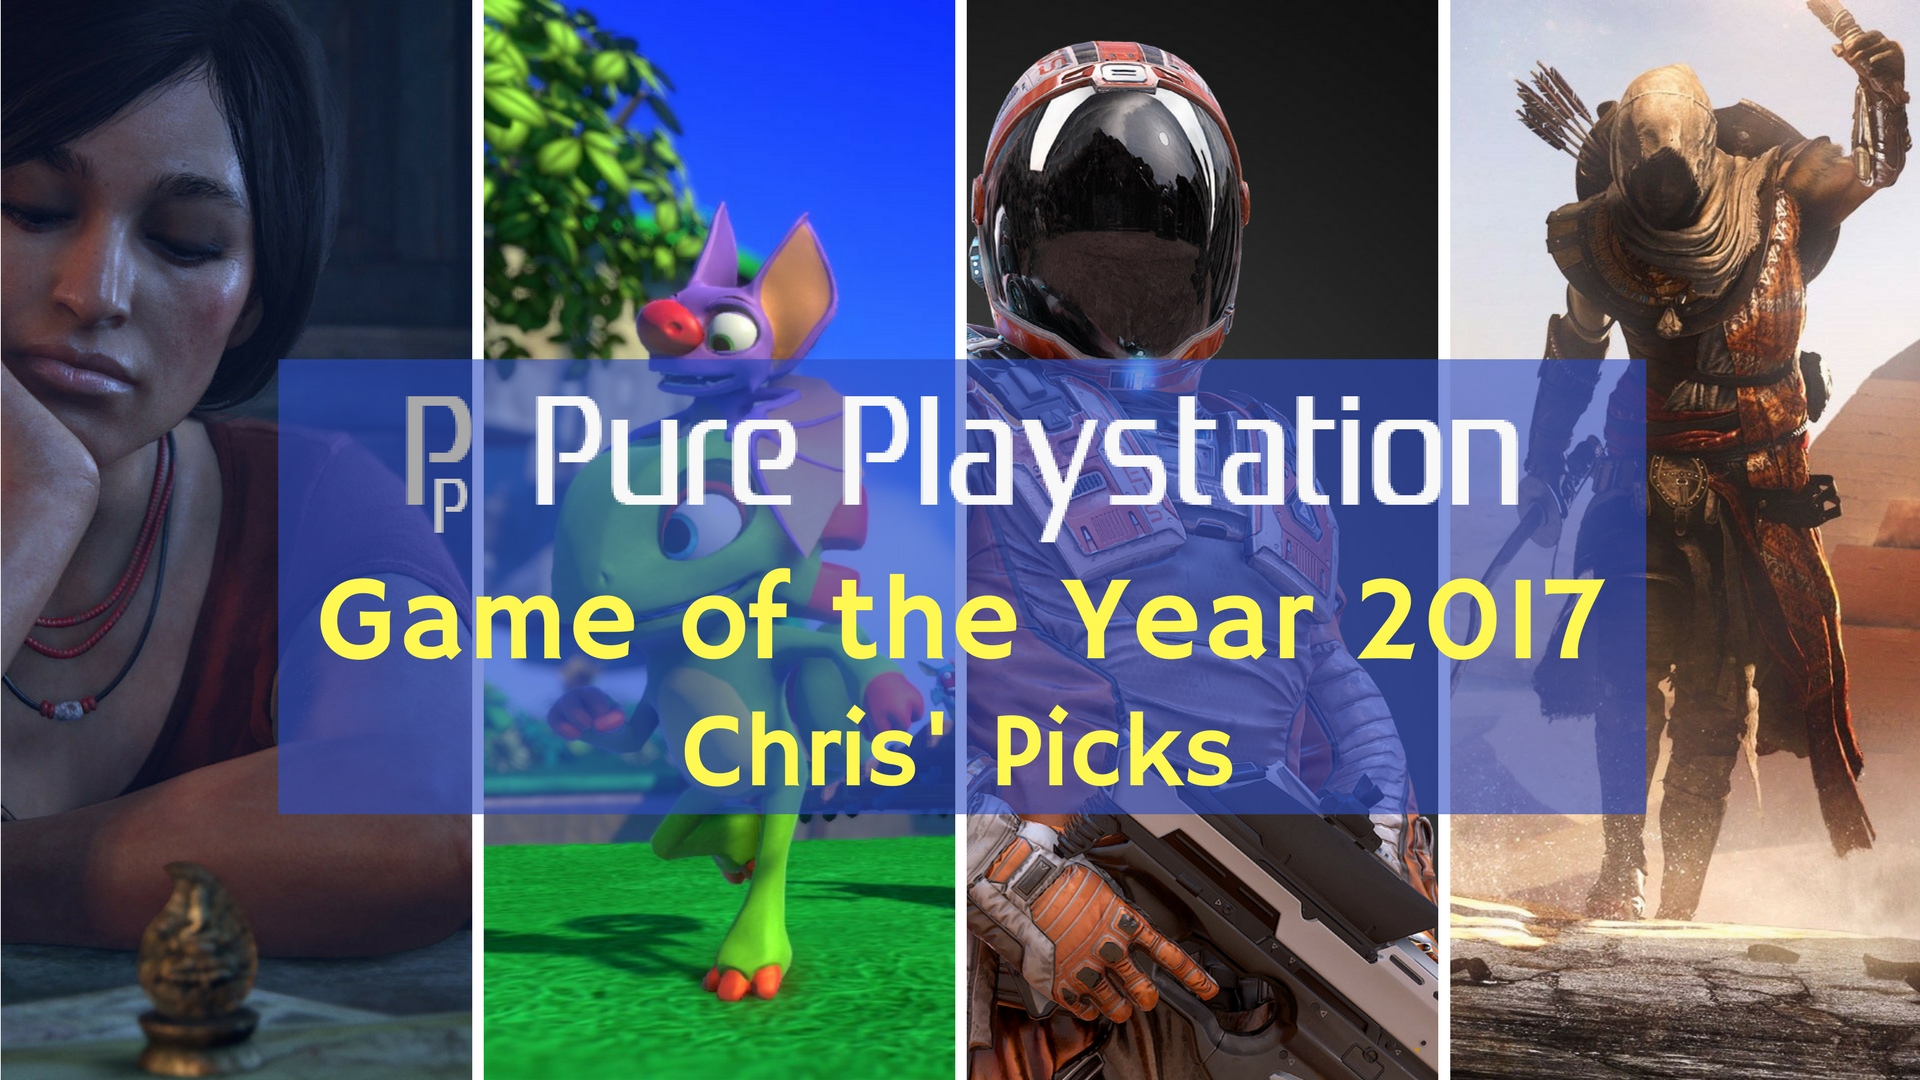 Feature: Game of the Year 2017 - Chris' Top 10 PS4/PSVR Games